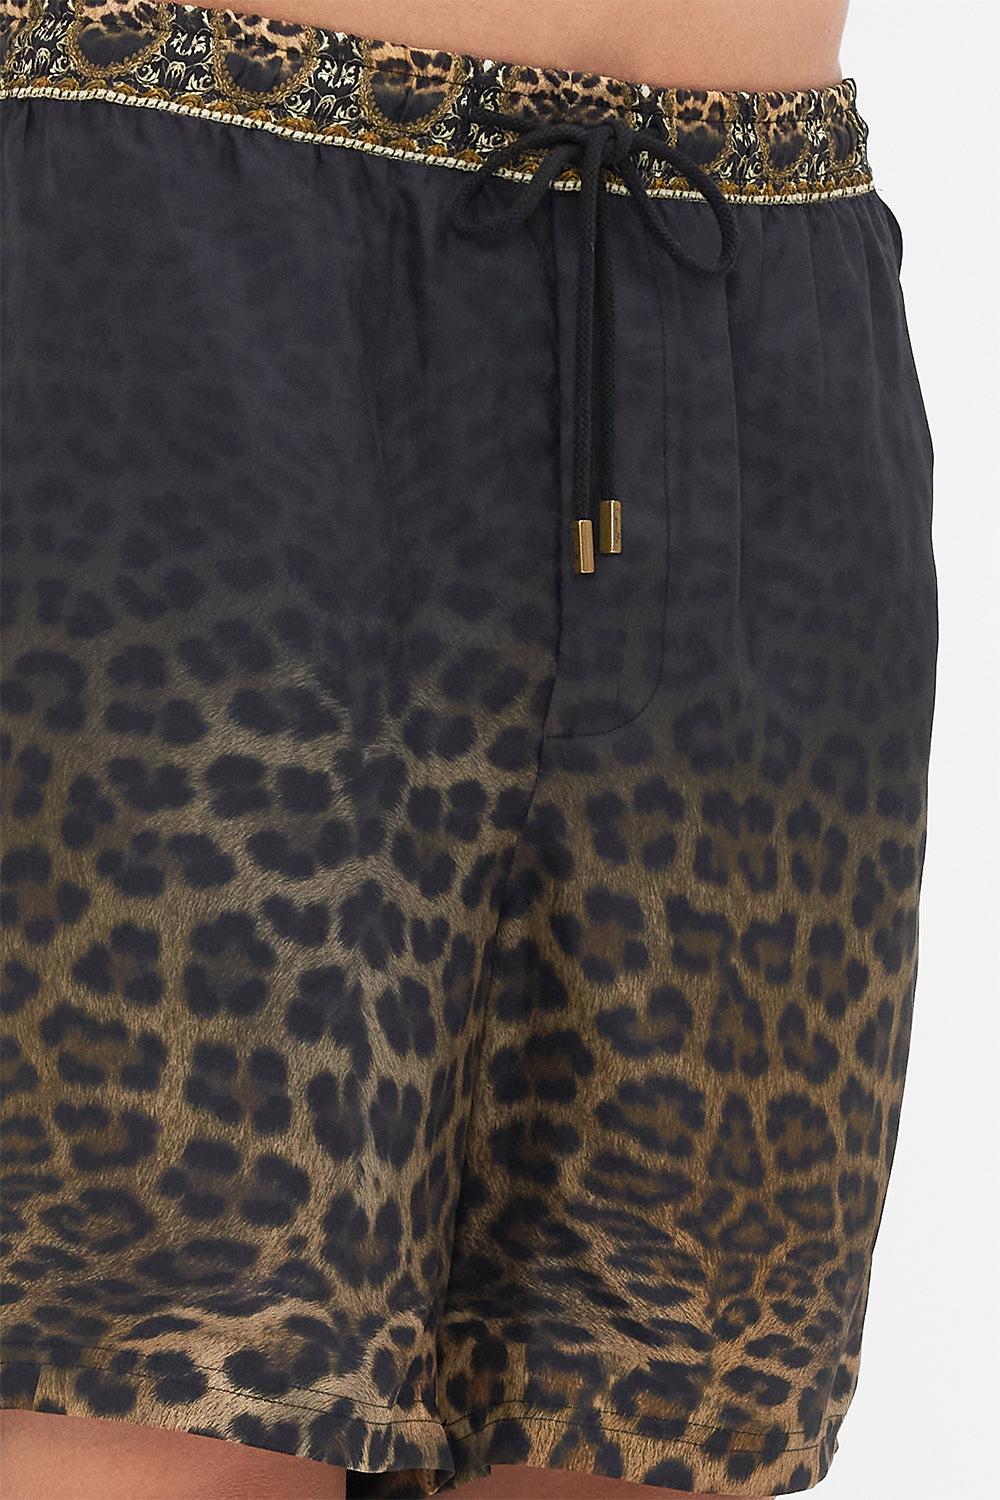 Detail view of Hotel Franks By CAMILLA mens walkshorts in Masked At Moonlight